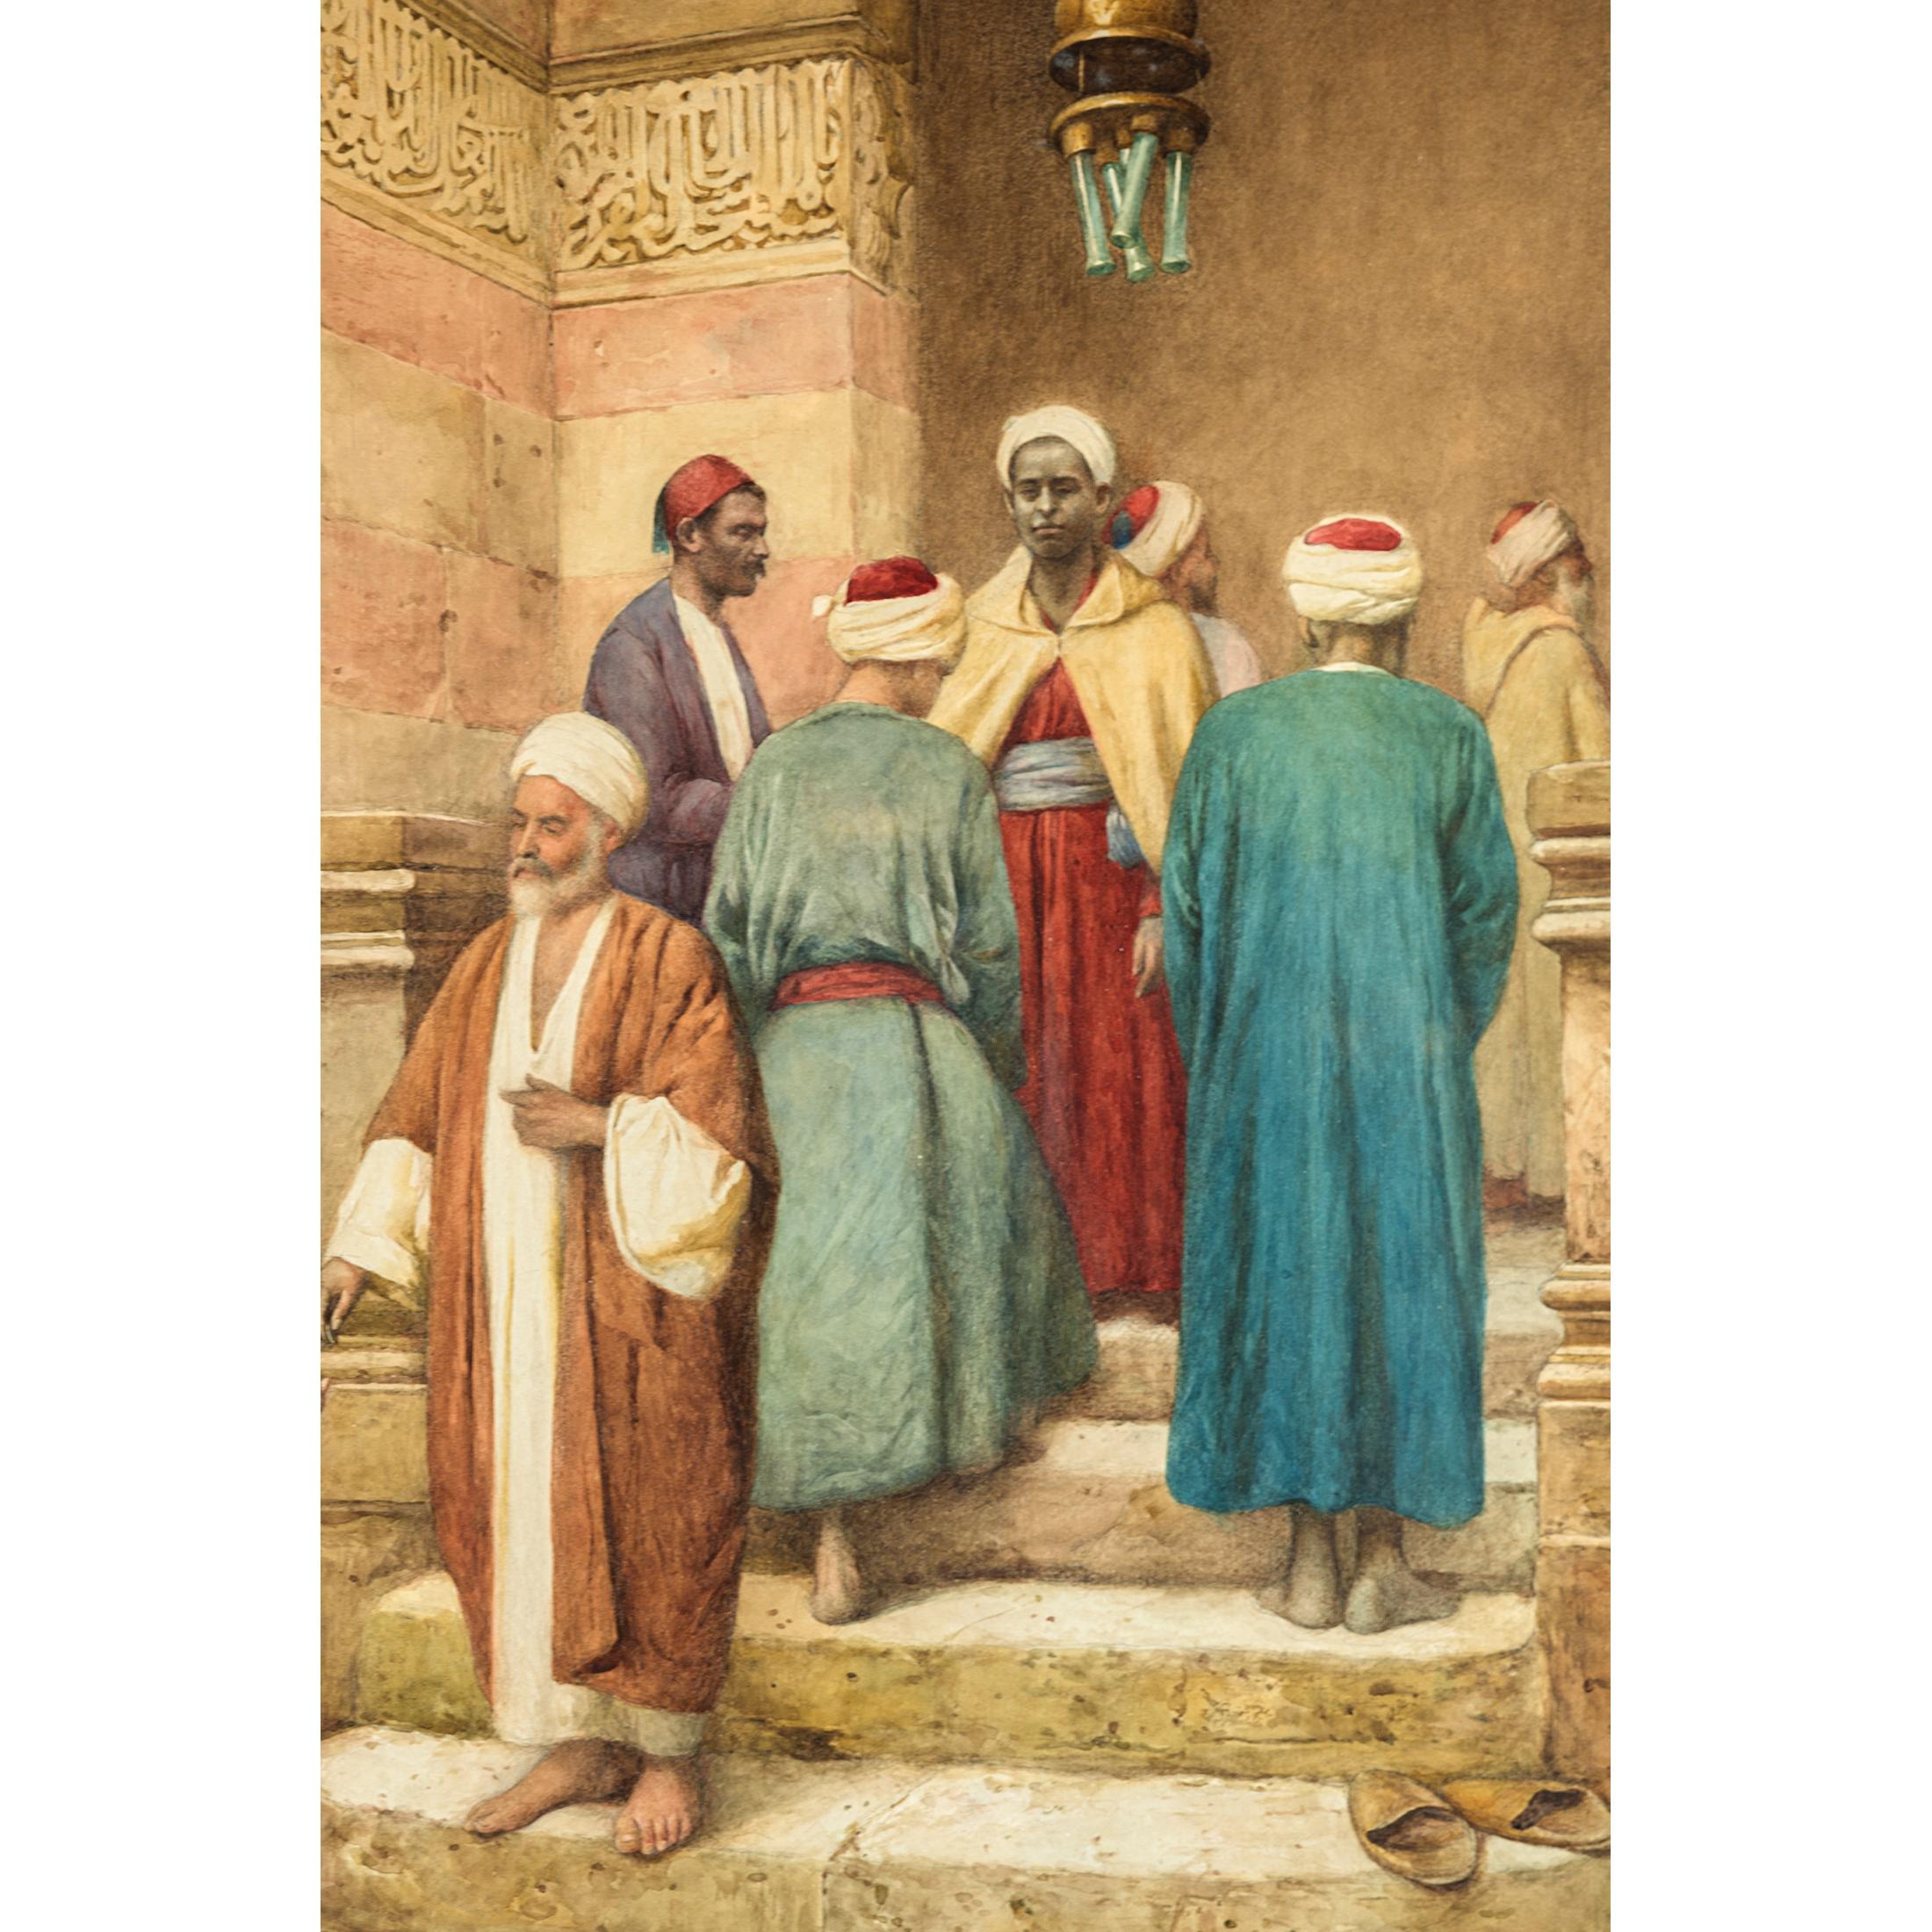 Original 19th century orientalist watercolor painting by Enrico Tarenghi. Signed 'E. Tarenghi' bottom right

Title: Entrance To The Mosque
Artist: Enrico Tarenghi (Italian, 1848-1938)
Date: 19th century
Medium: Watercolor on paper
Dimension: